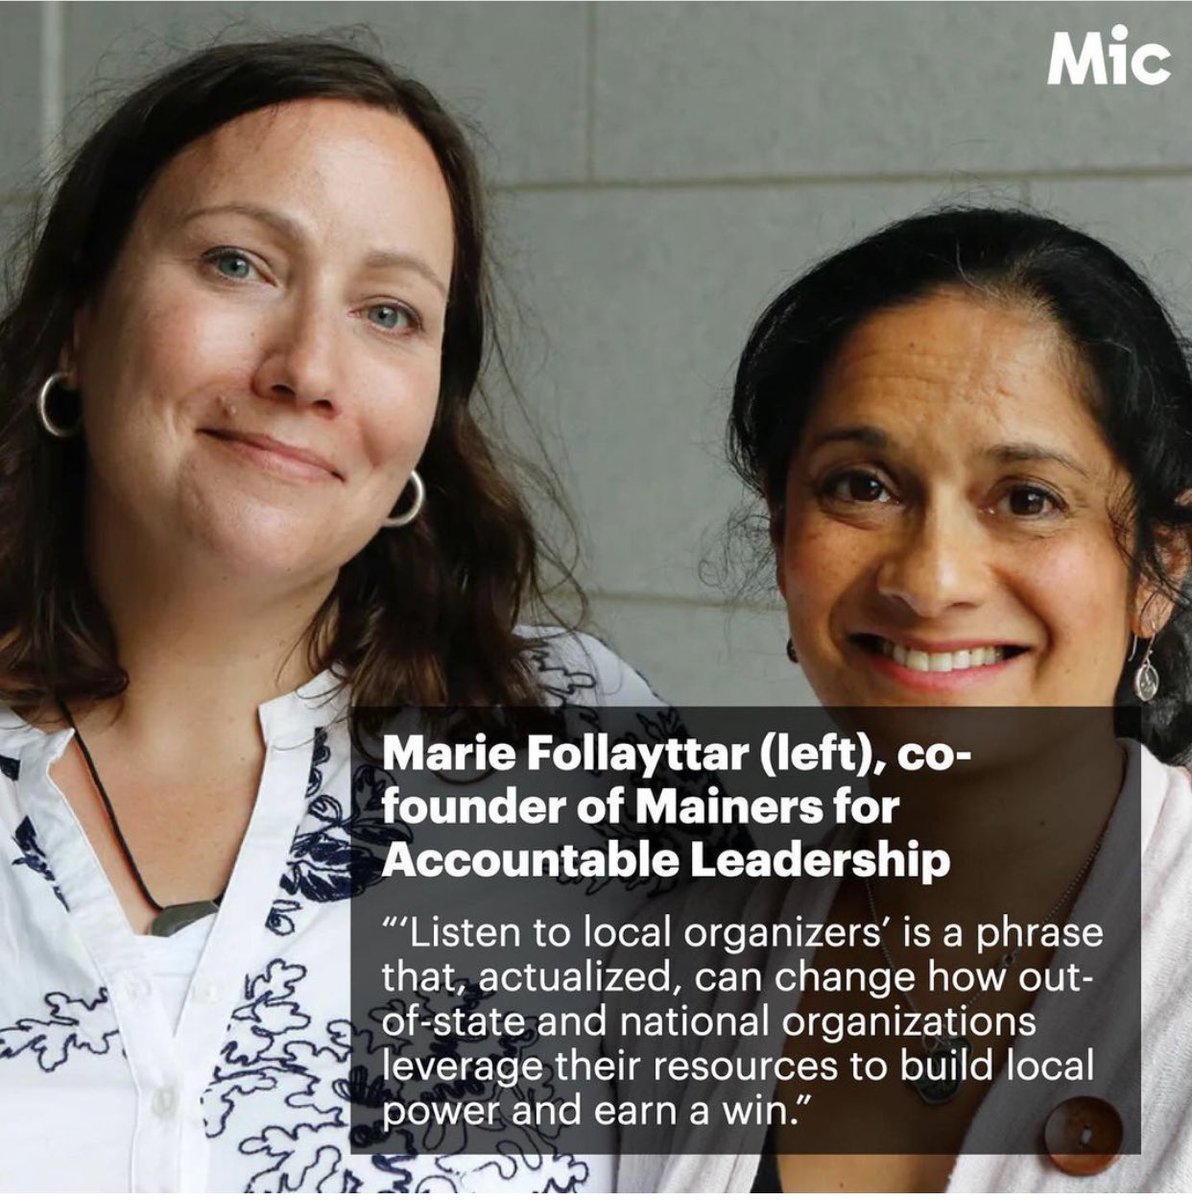 Our Director  @MarieFollayttar reflected on 2020 with  @raylevyuyeda of  @mic.  #mepolitics 1/